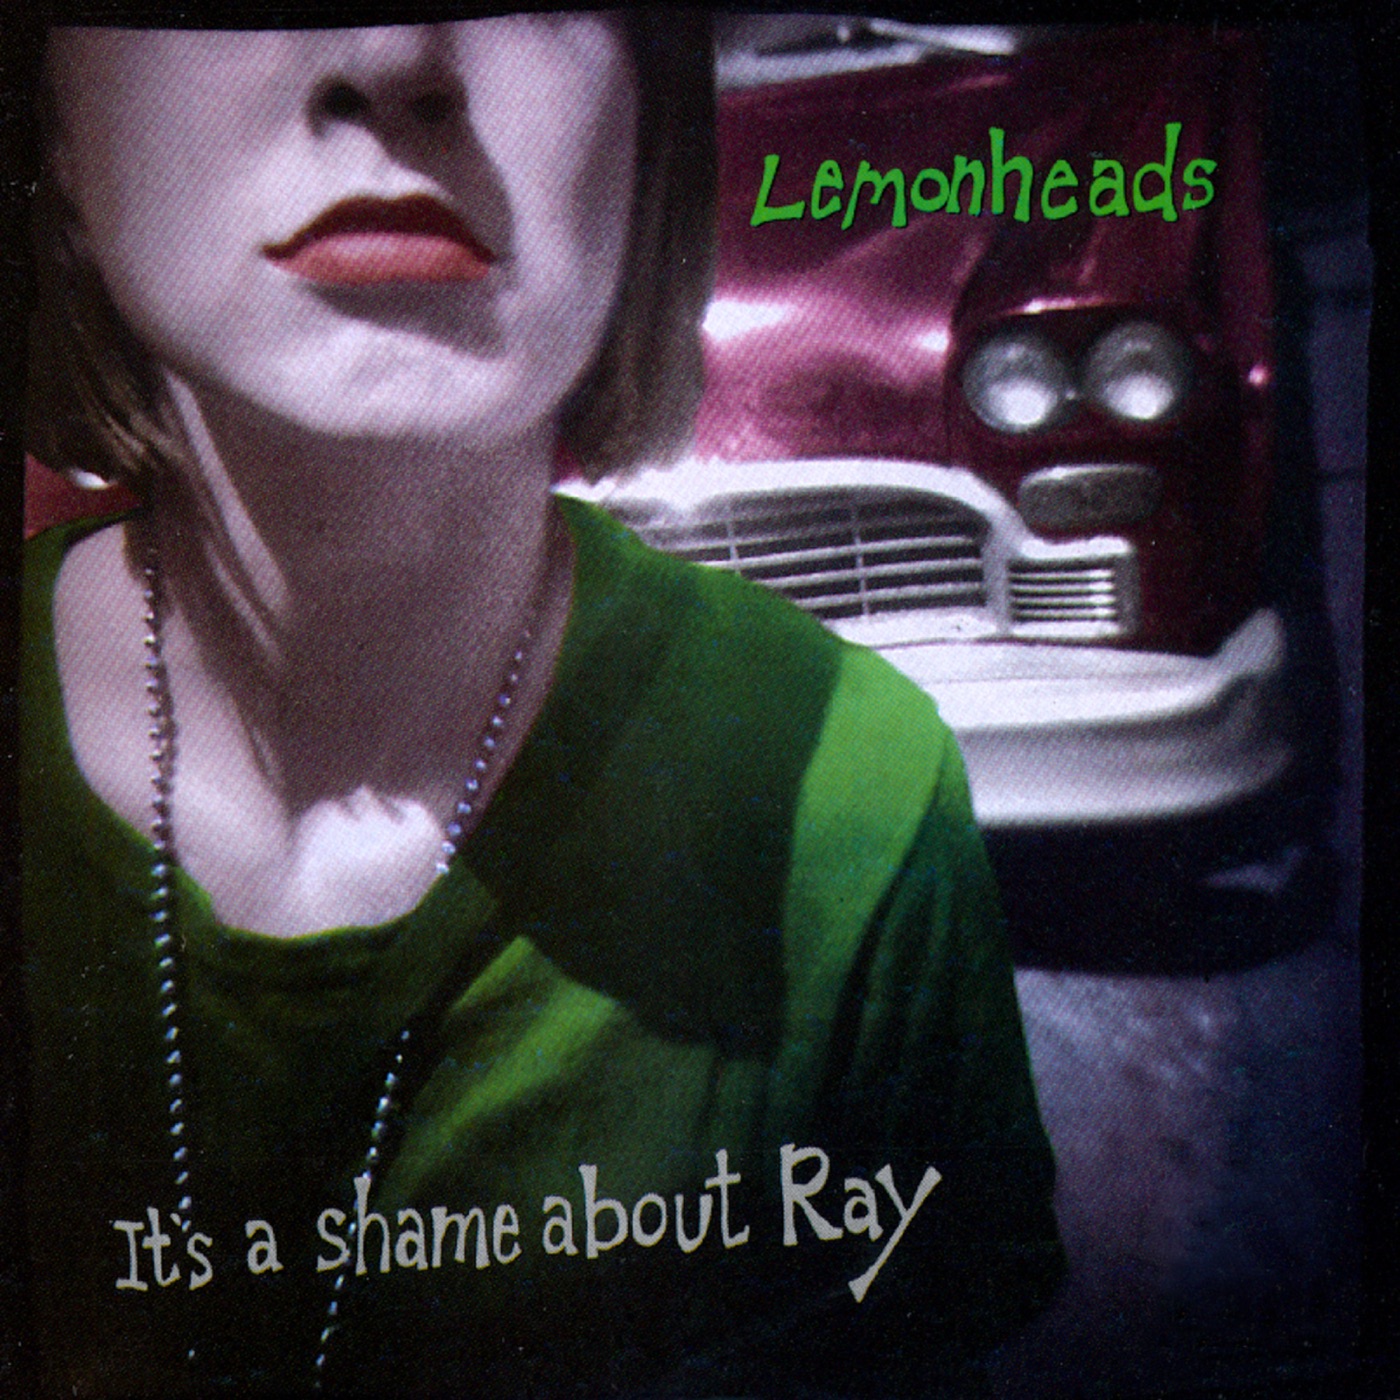 It's a Shame About Ray by The Lemonheads